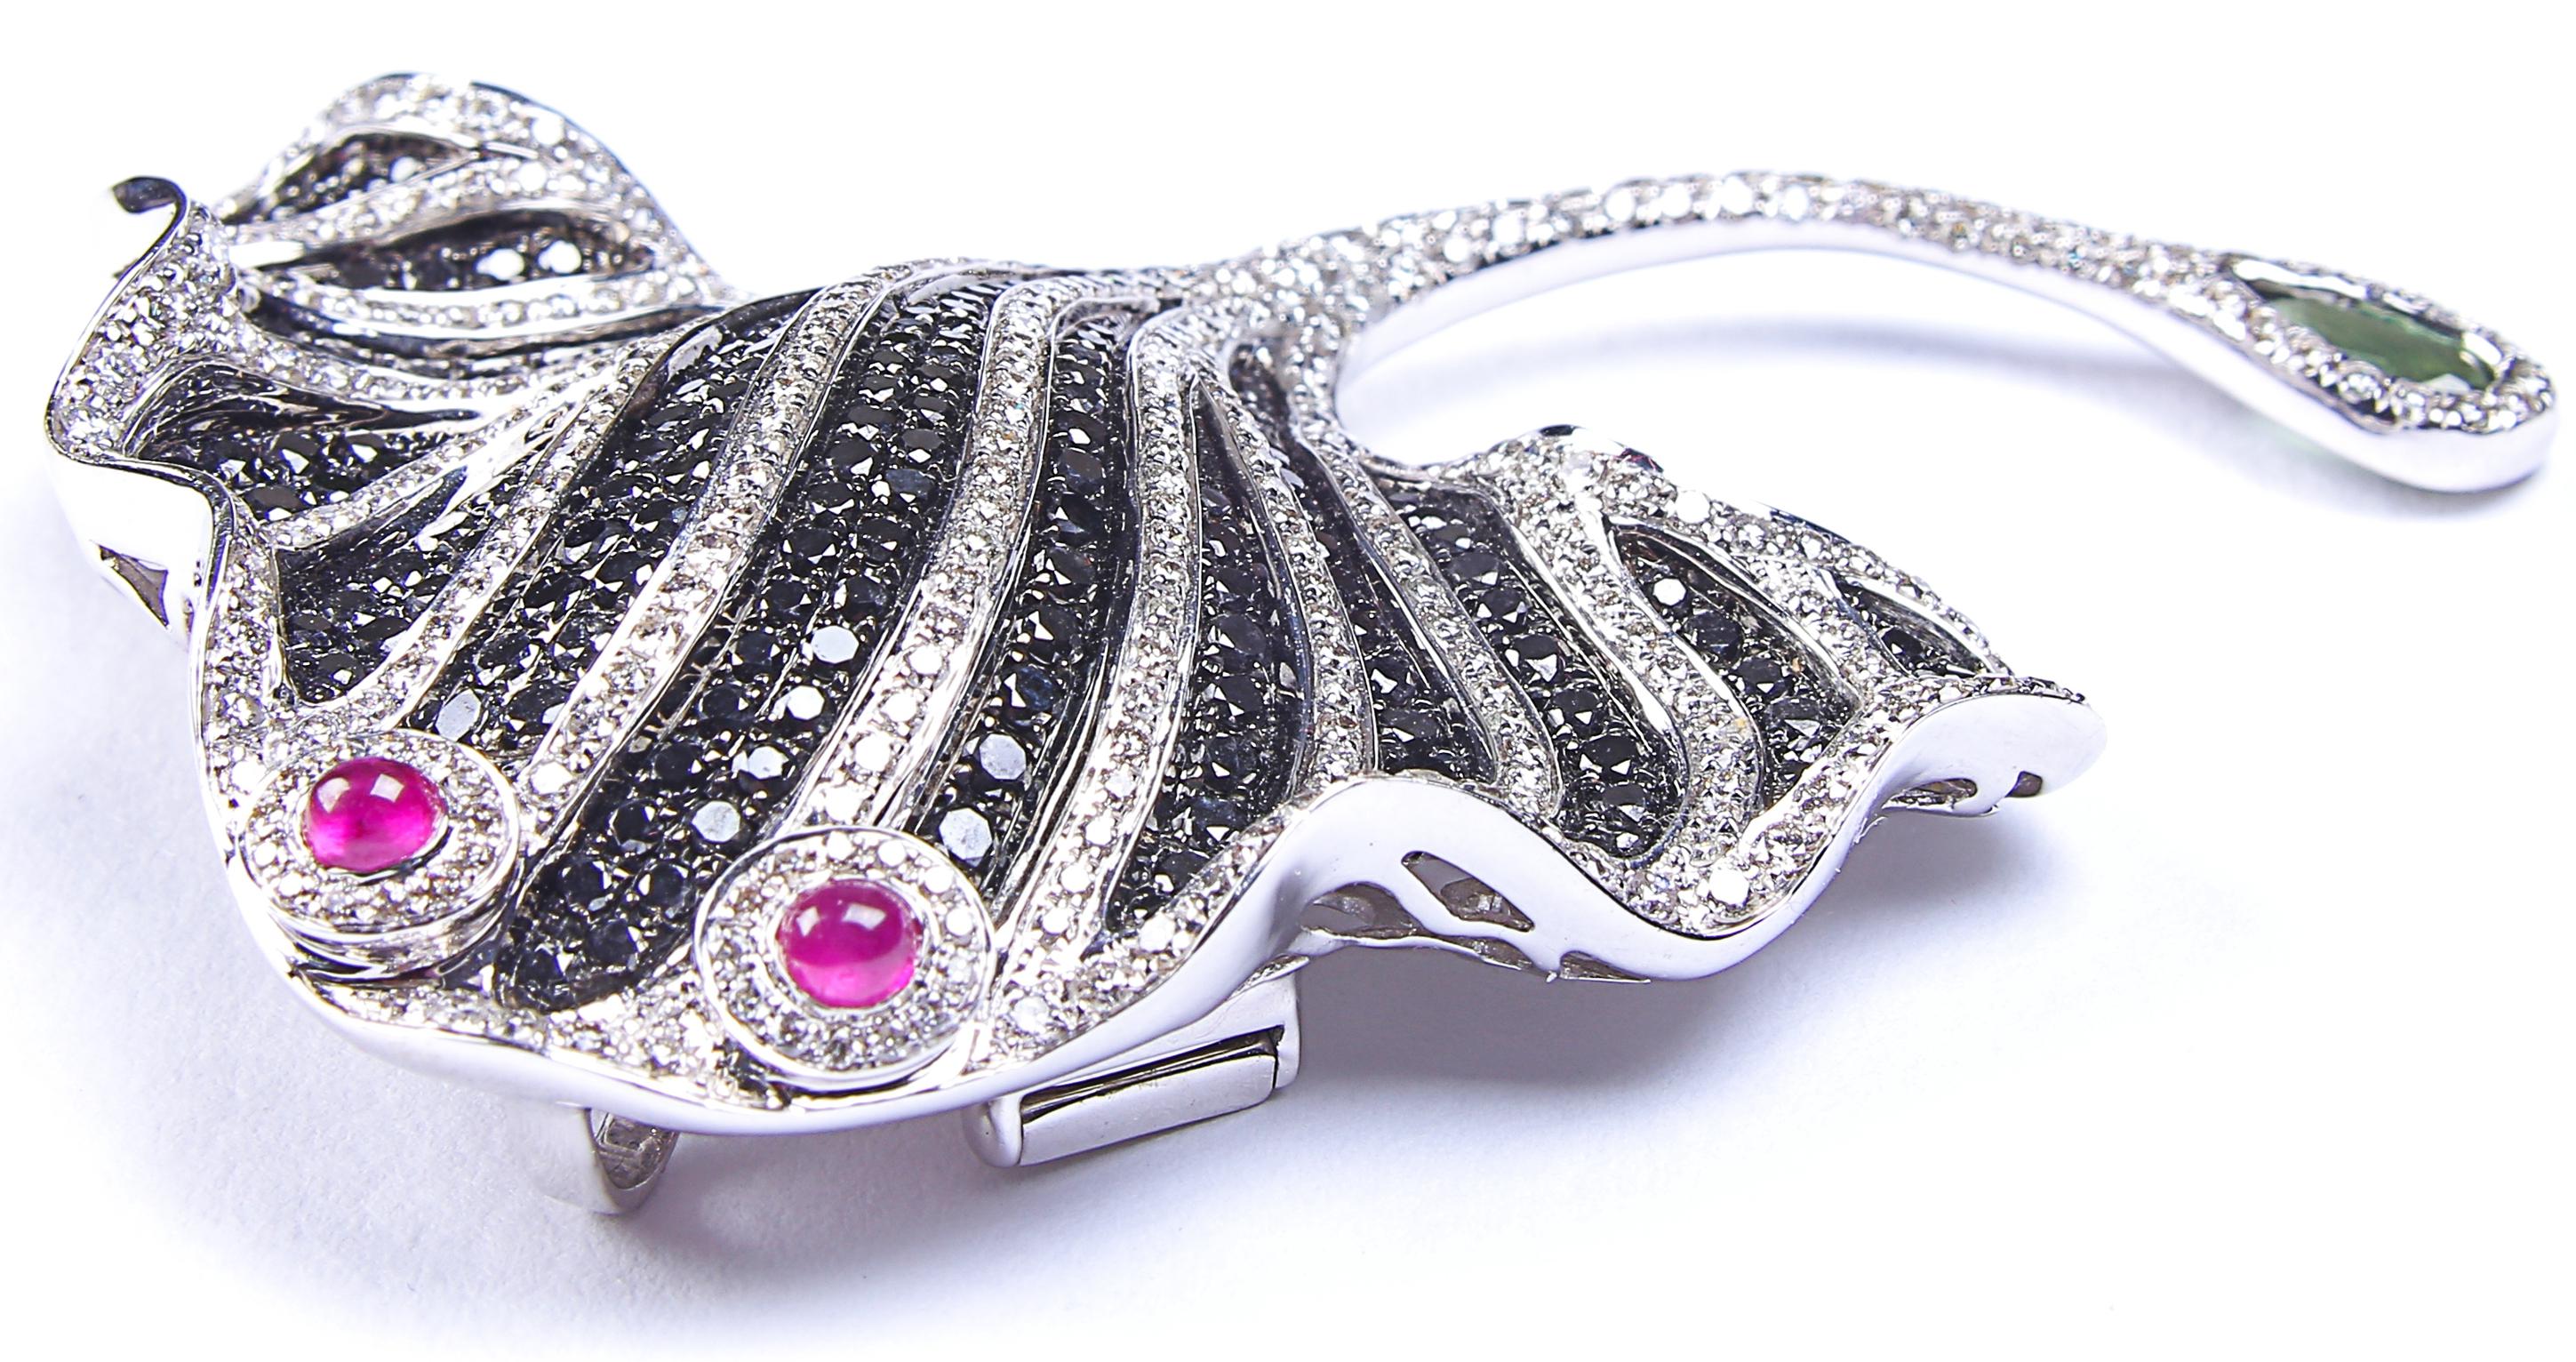 An unusual and spectacular marine piece; designed to be worn either as a brooch or a pendant. This stunning stingray or manta ray is created from 18 karat white gold and stamped 750. There is a covering of pave-set black gemstones, edged and striped